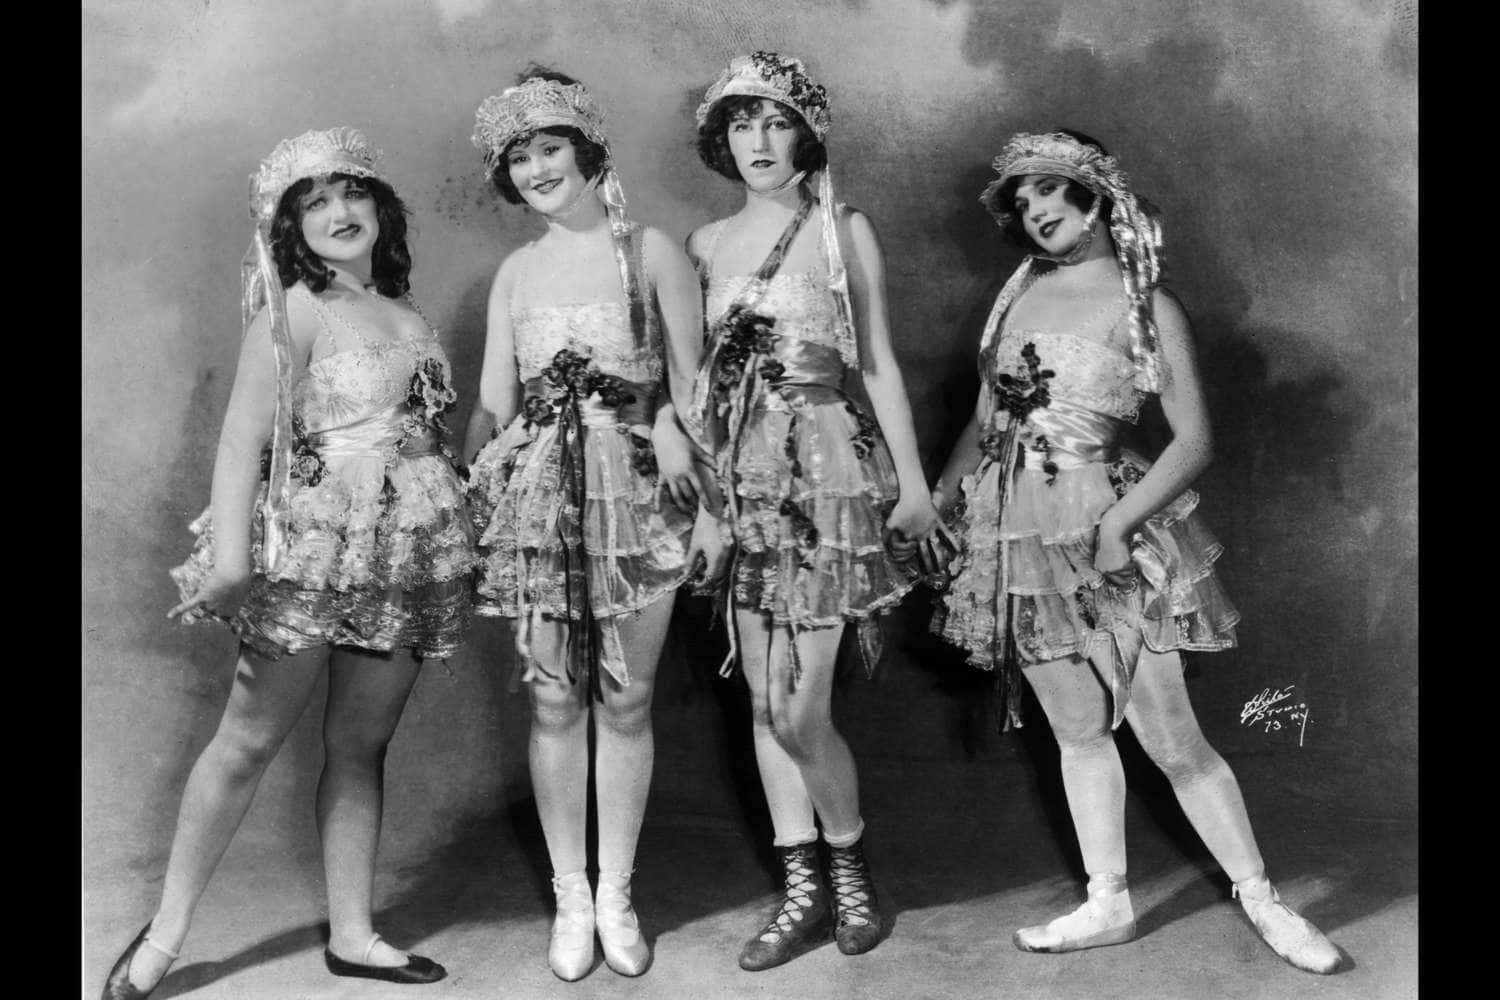 Four Women In Hats And Dresses Posing For A Photo